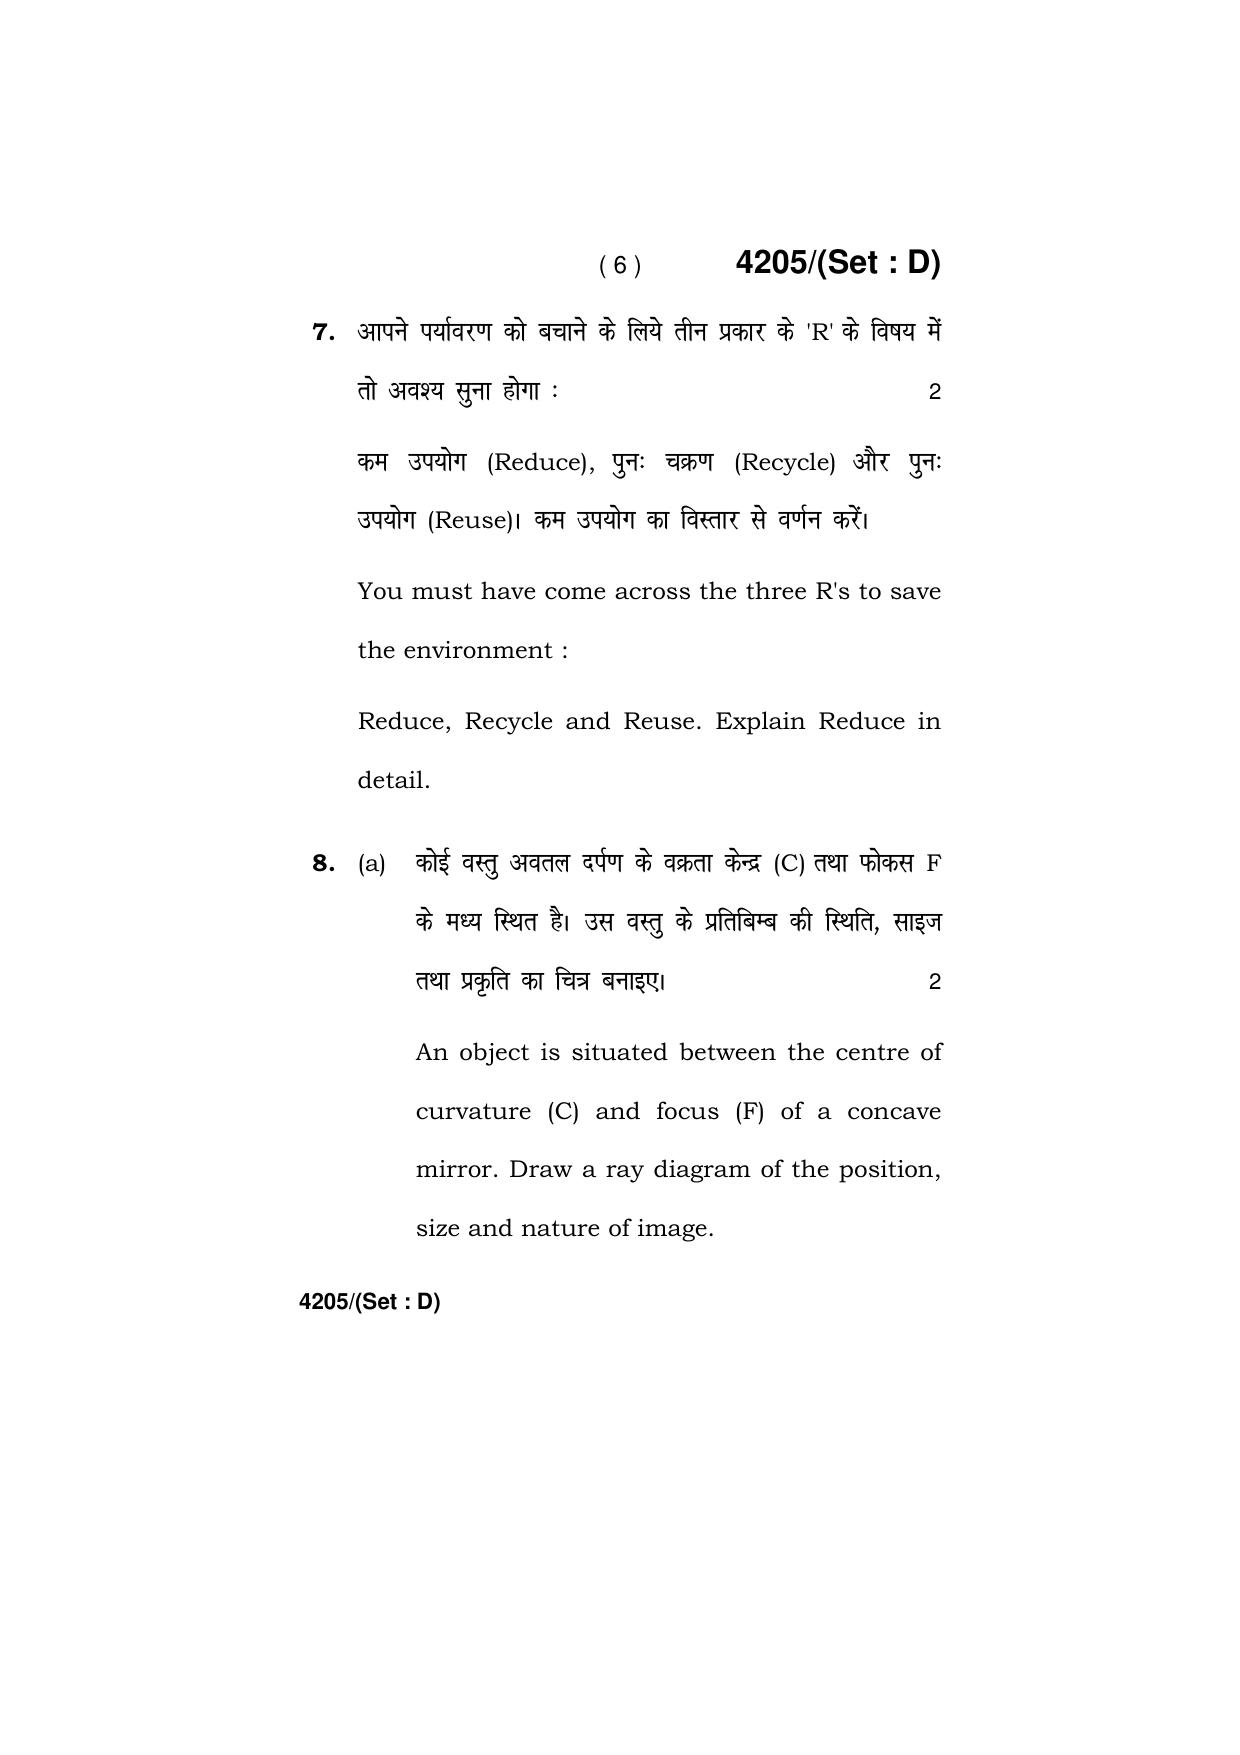 Haryana Board HBSE Class 10 Science (All Set) 2019 Question Paper - Page 54